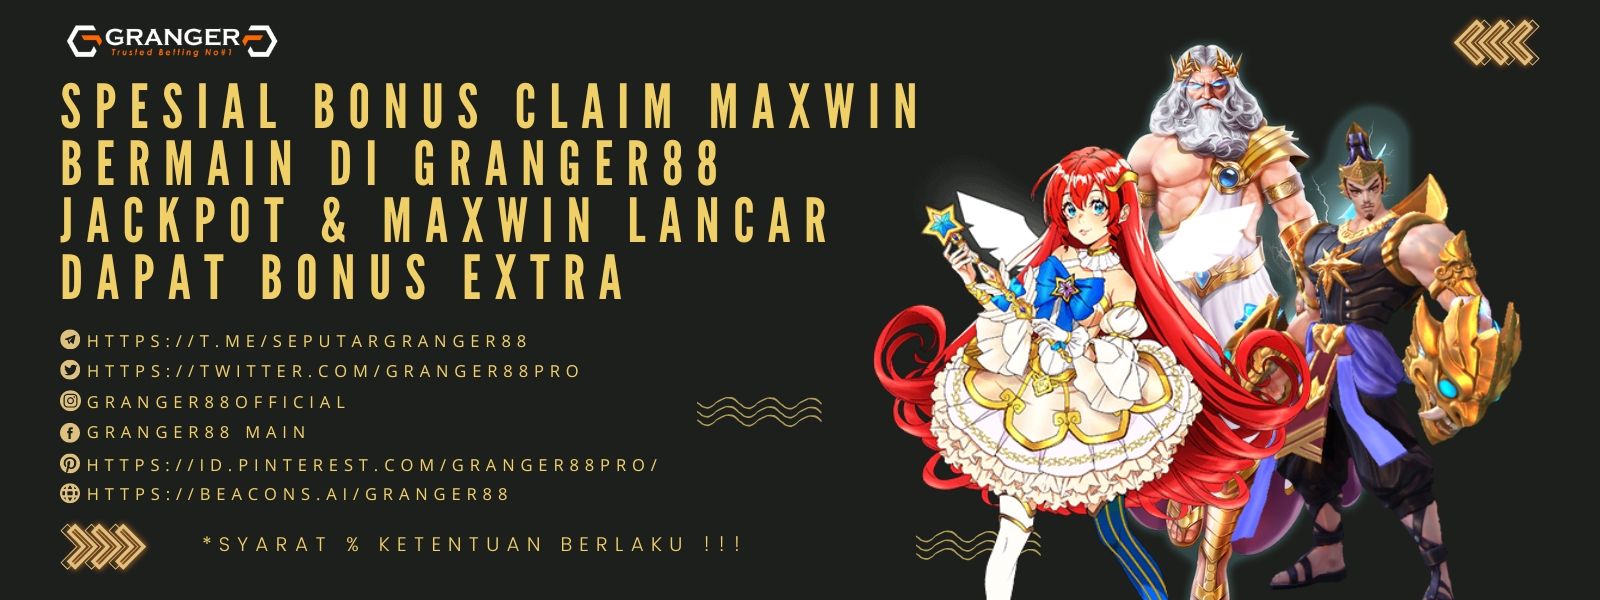 EVENT MAXWIN